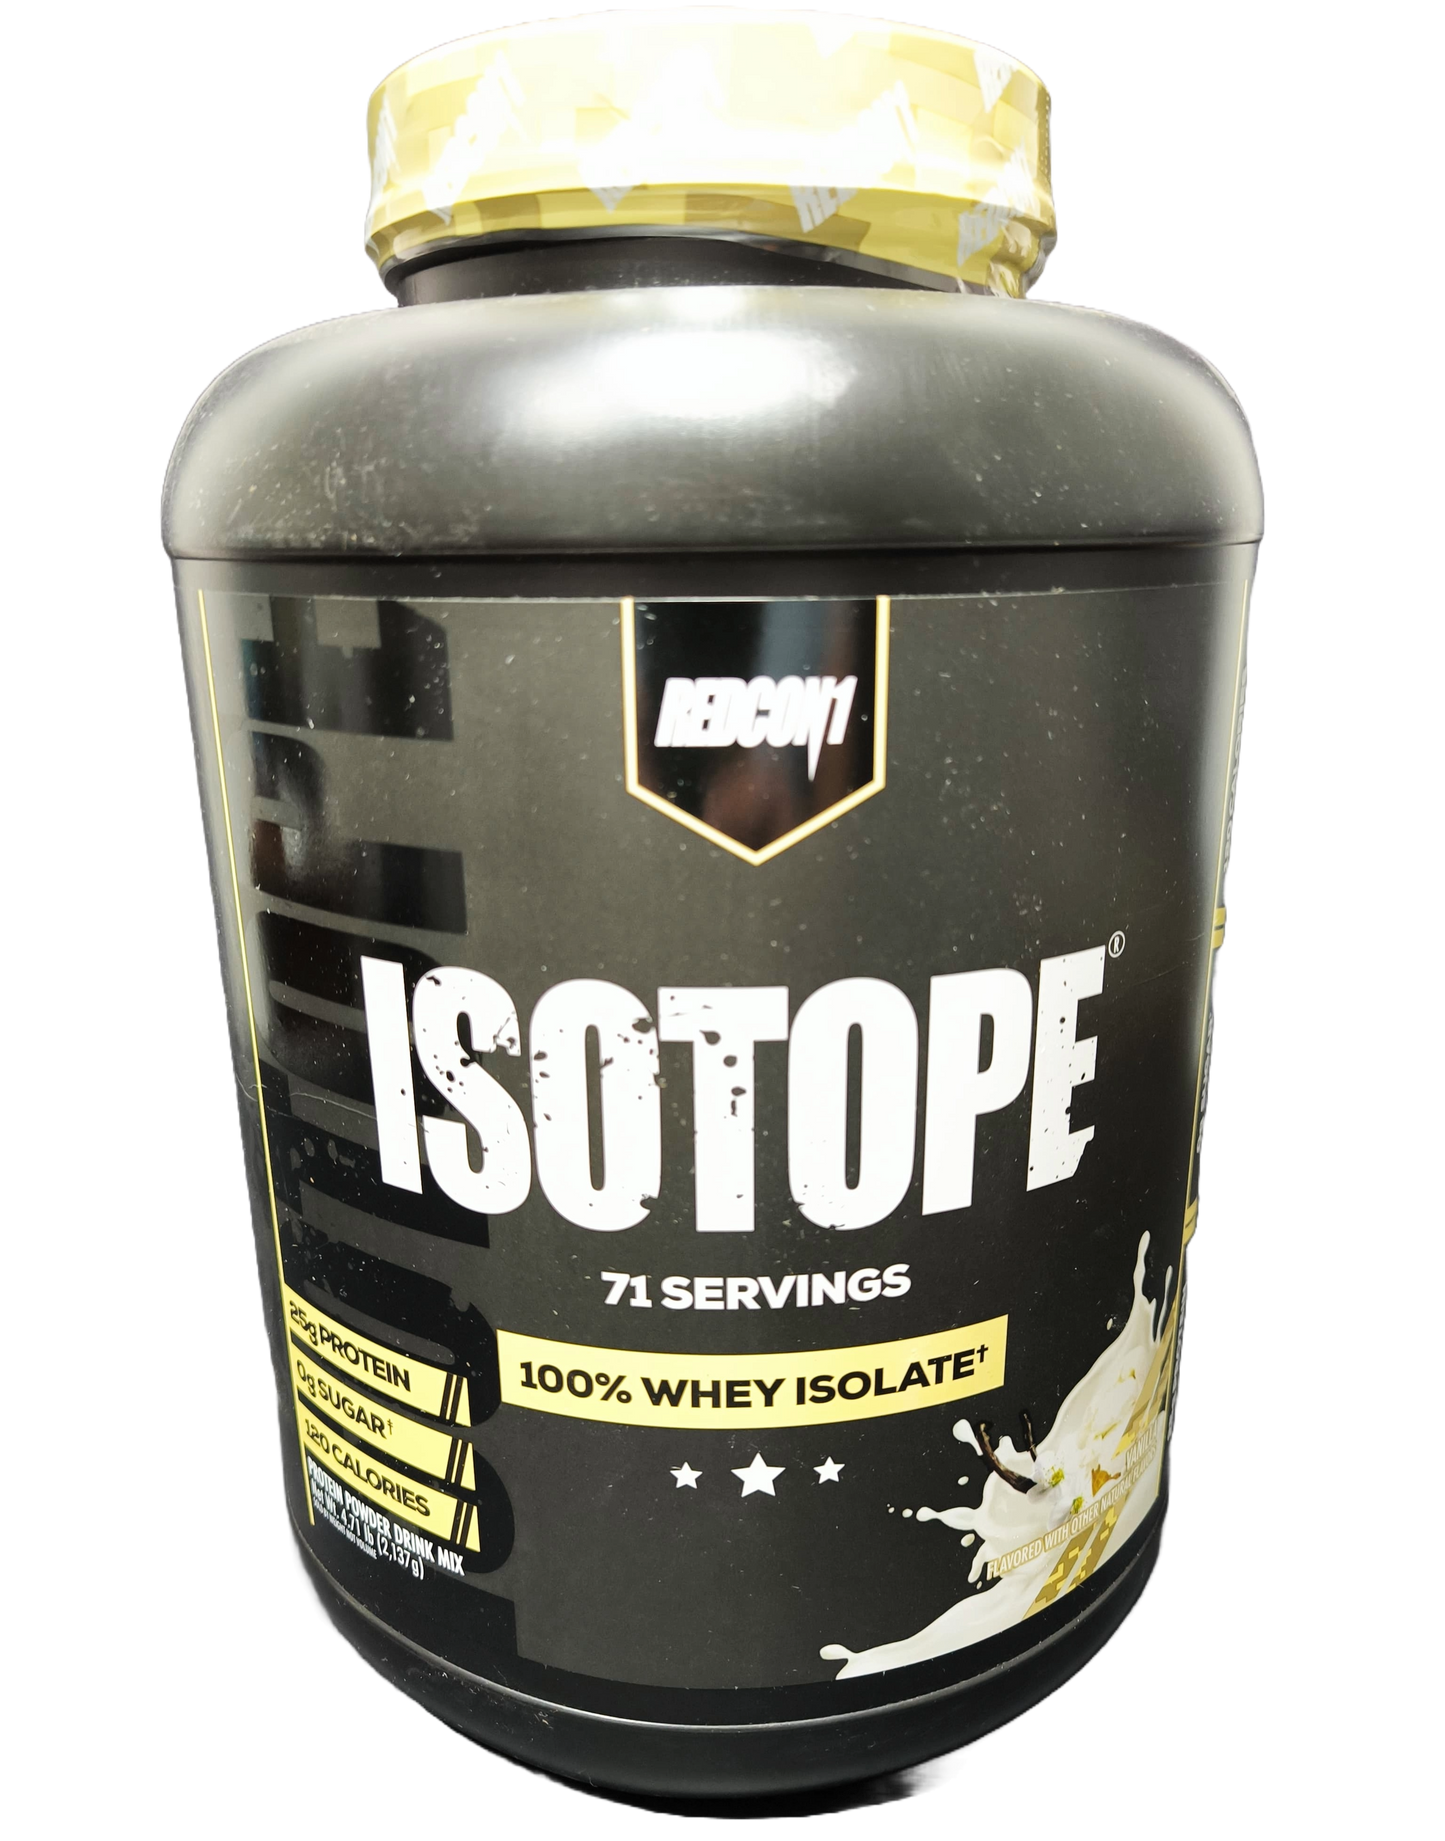 WHEY ISOLATE PROTEIN ISOTOPE REDCON1 71 SERVIDAS 5LBS.